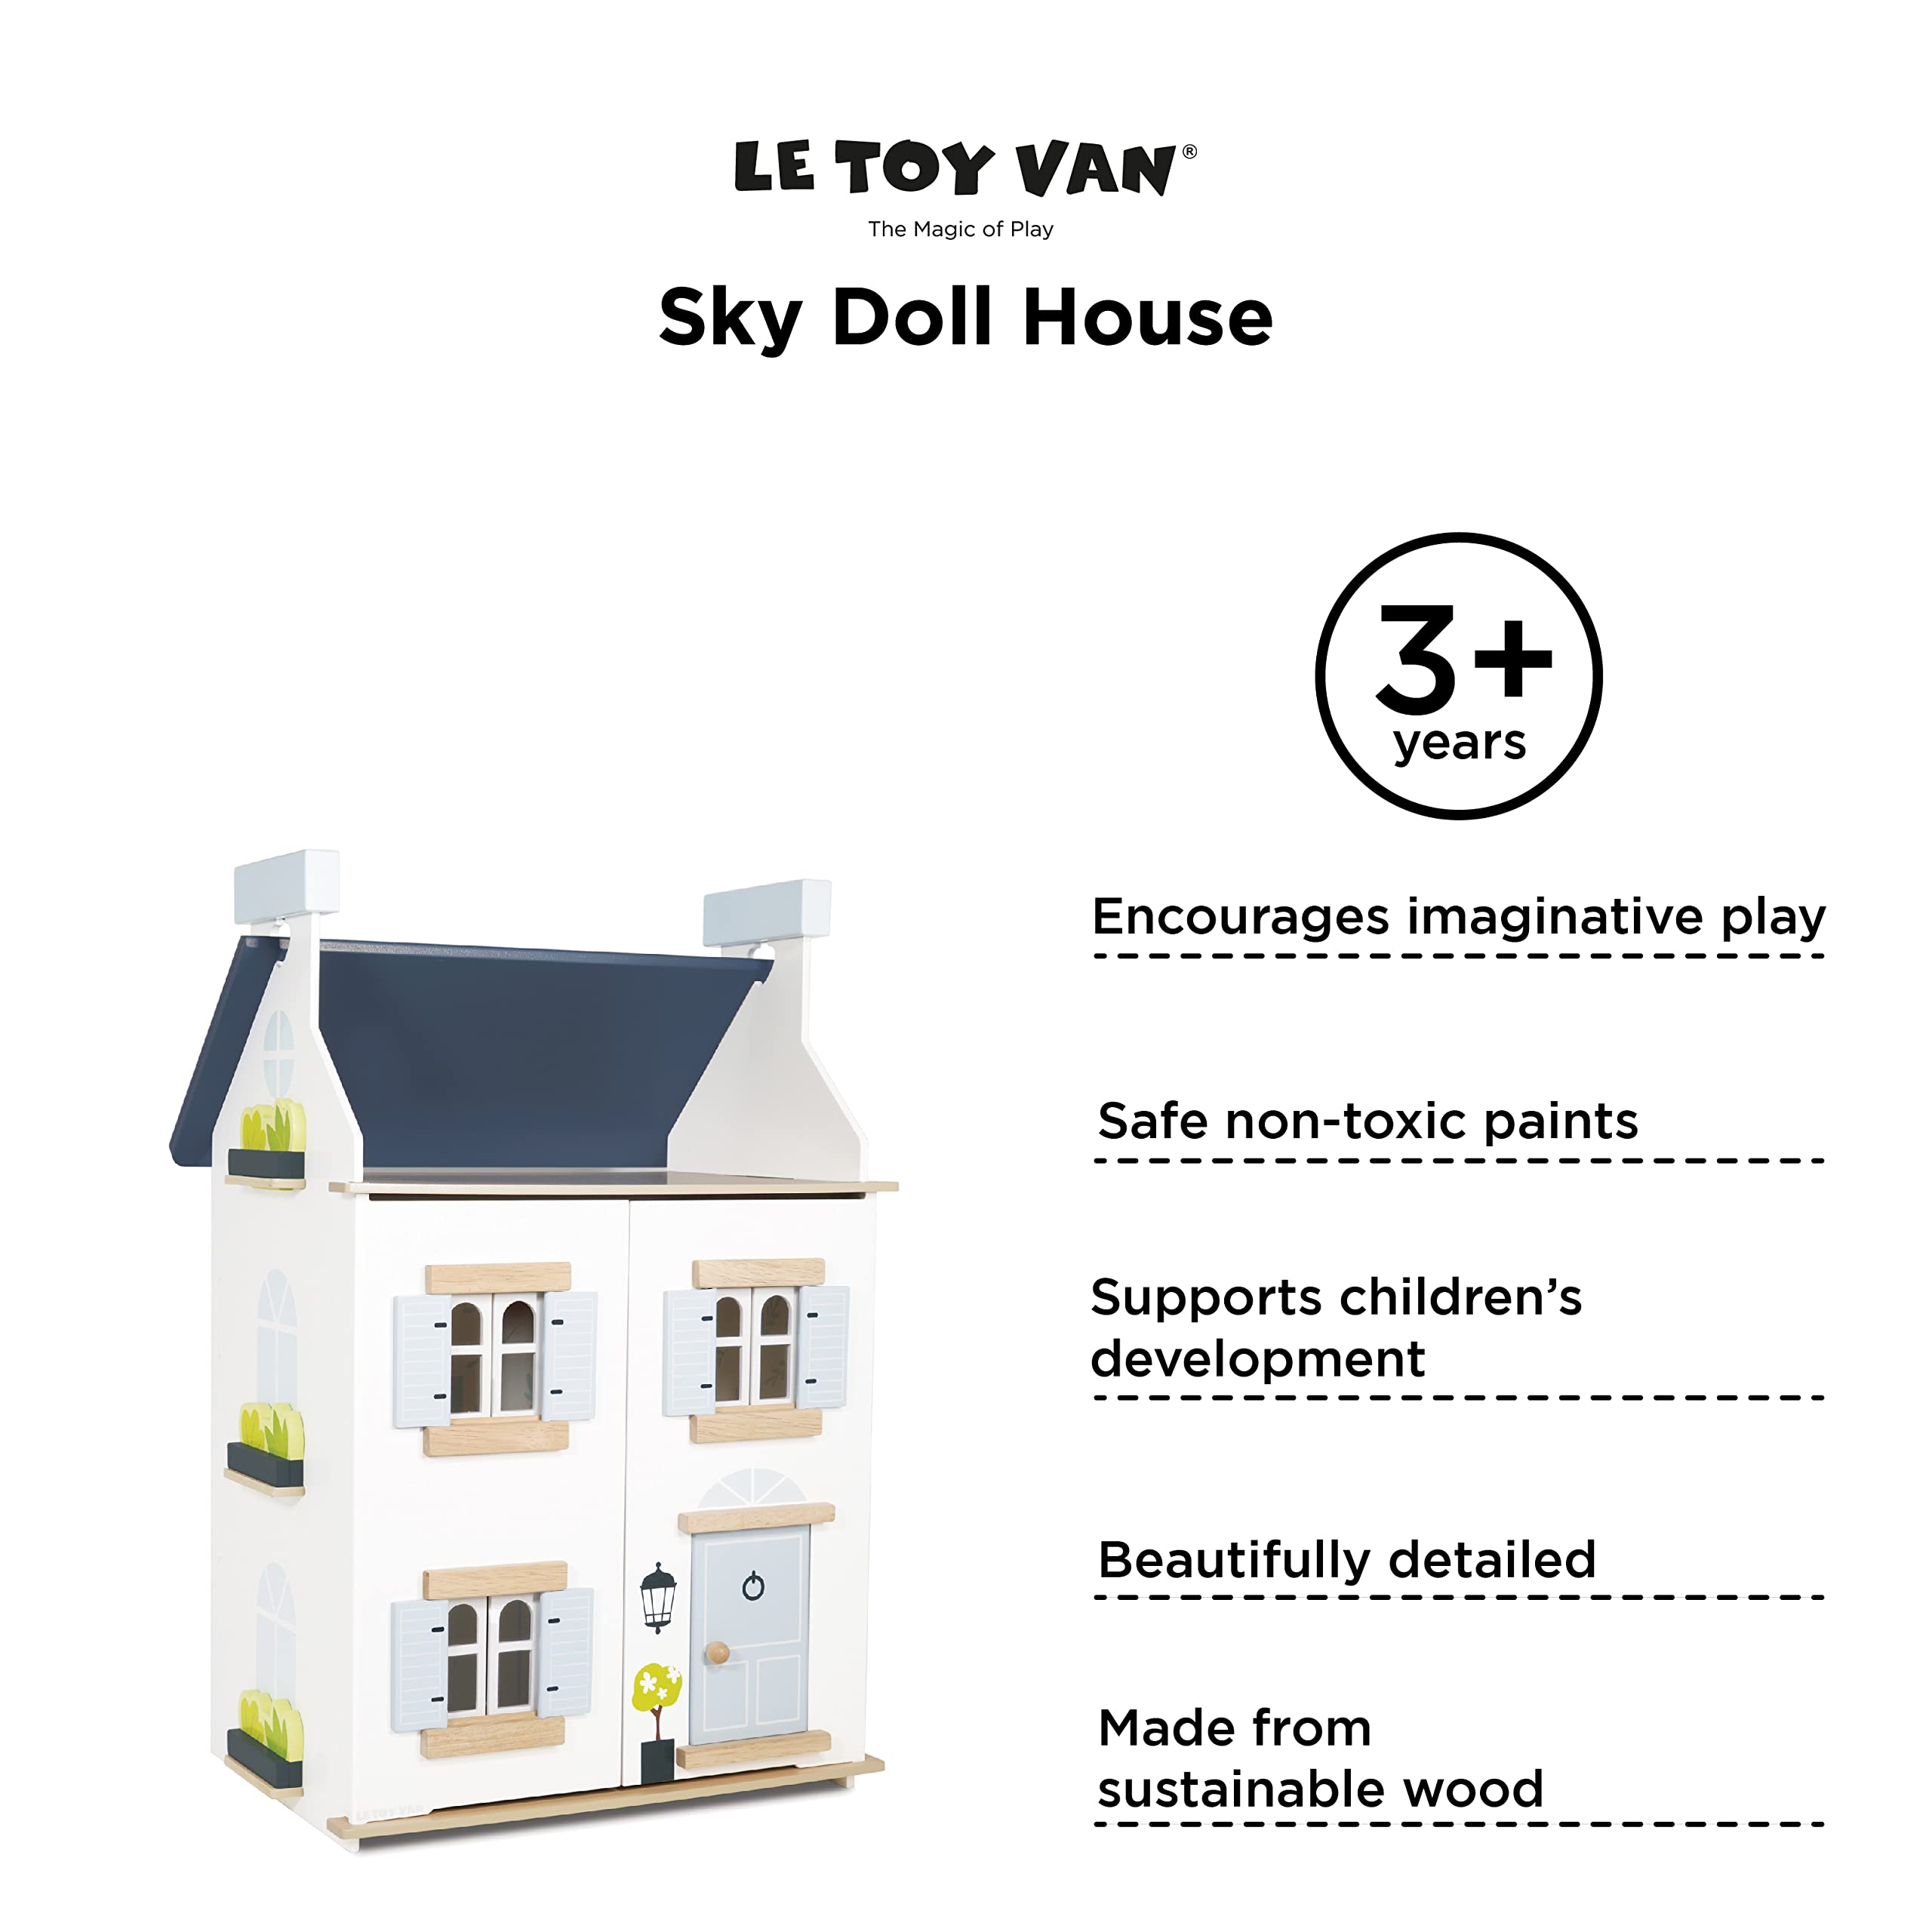 Le Toy Van - Wooden- Sky Doll House - Kids Dream House - 2 Storey with Attic - Fill with Dollhouse Accessories - Suitable for Ages 3+